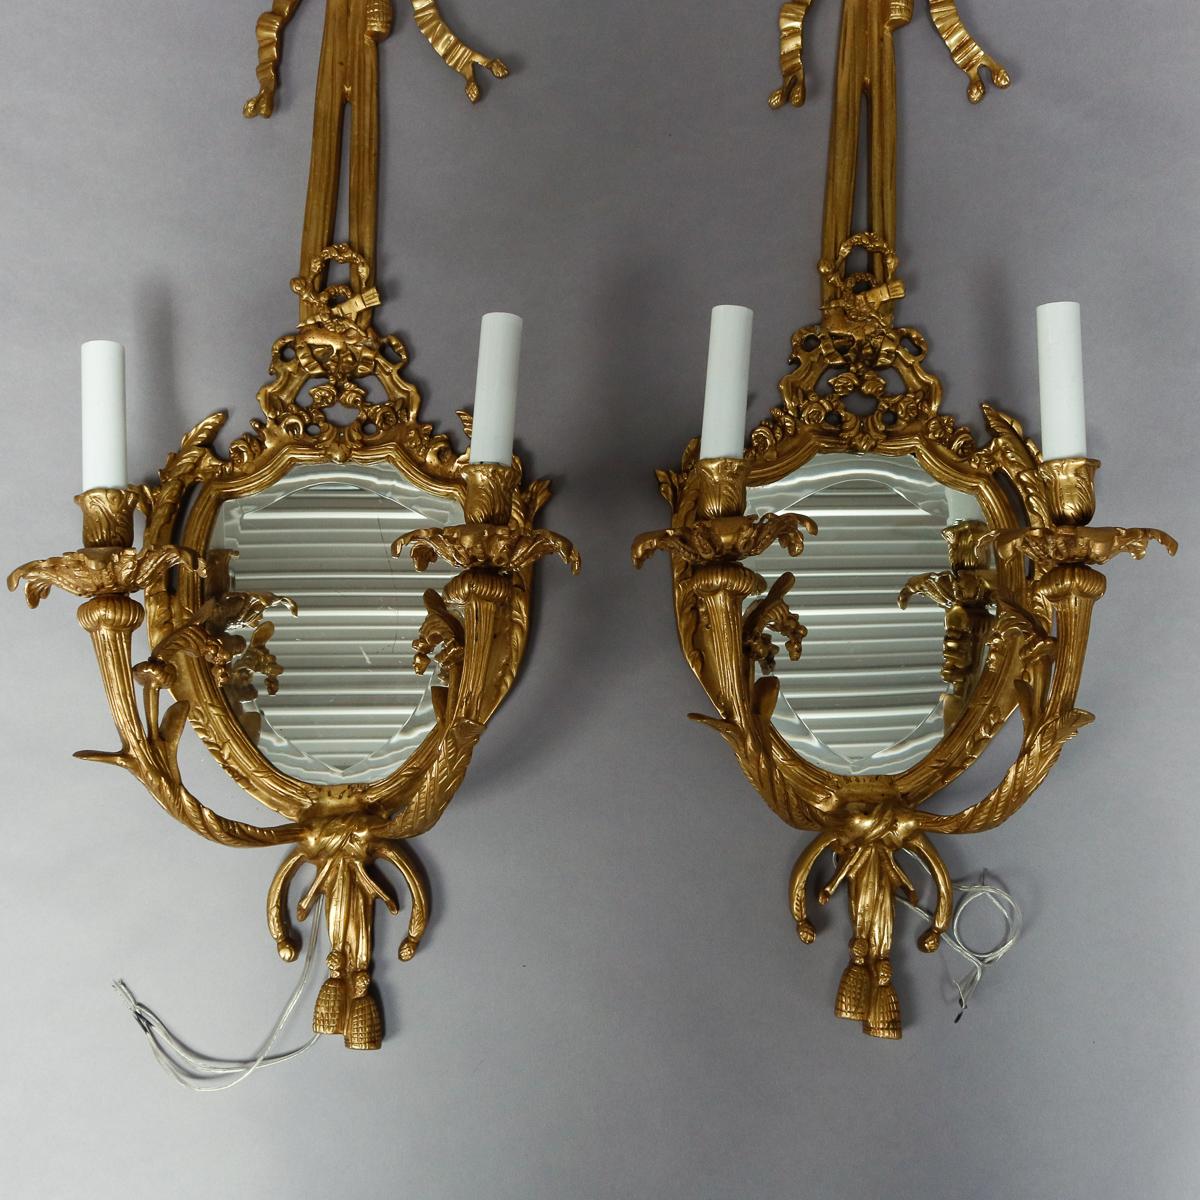 American Vintage Pair of Federal Brass Double Candle Light Mirrored Wall Sconces